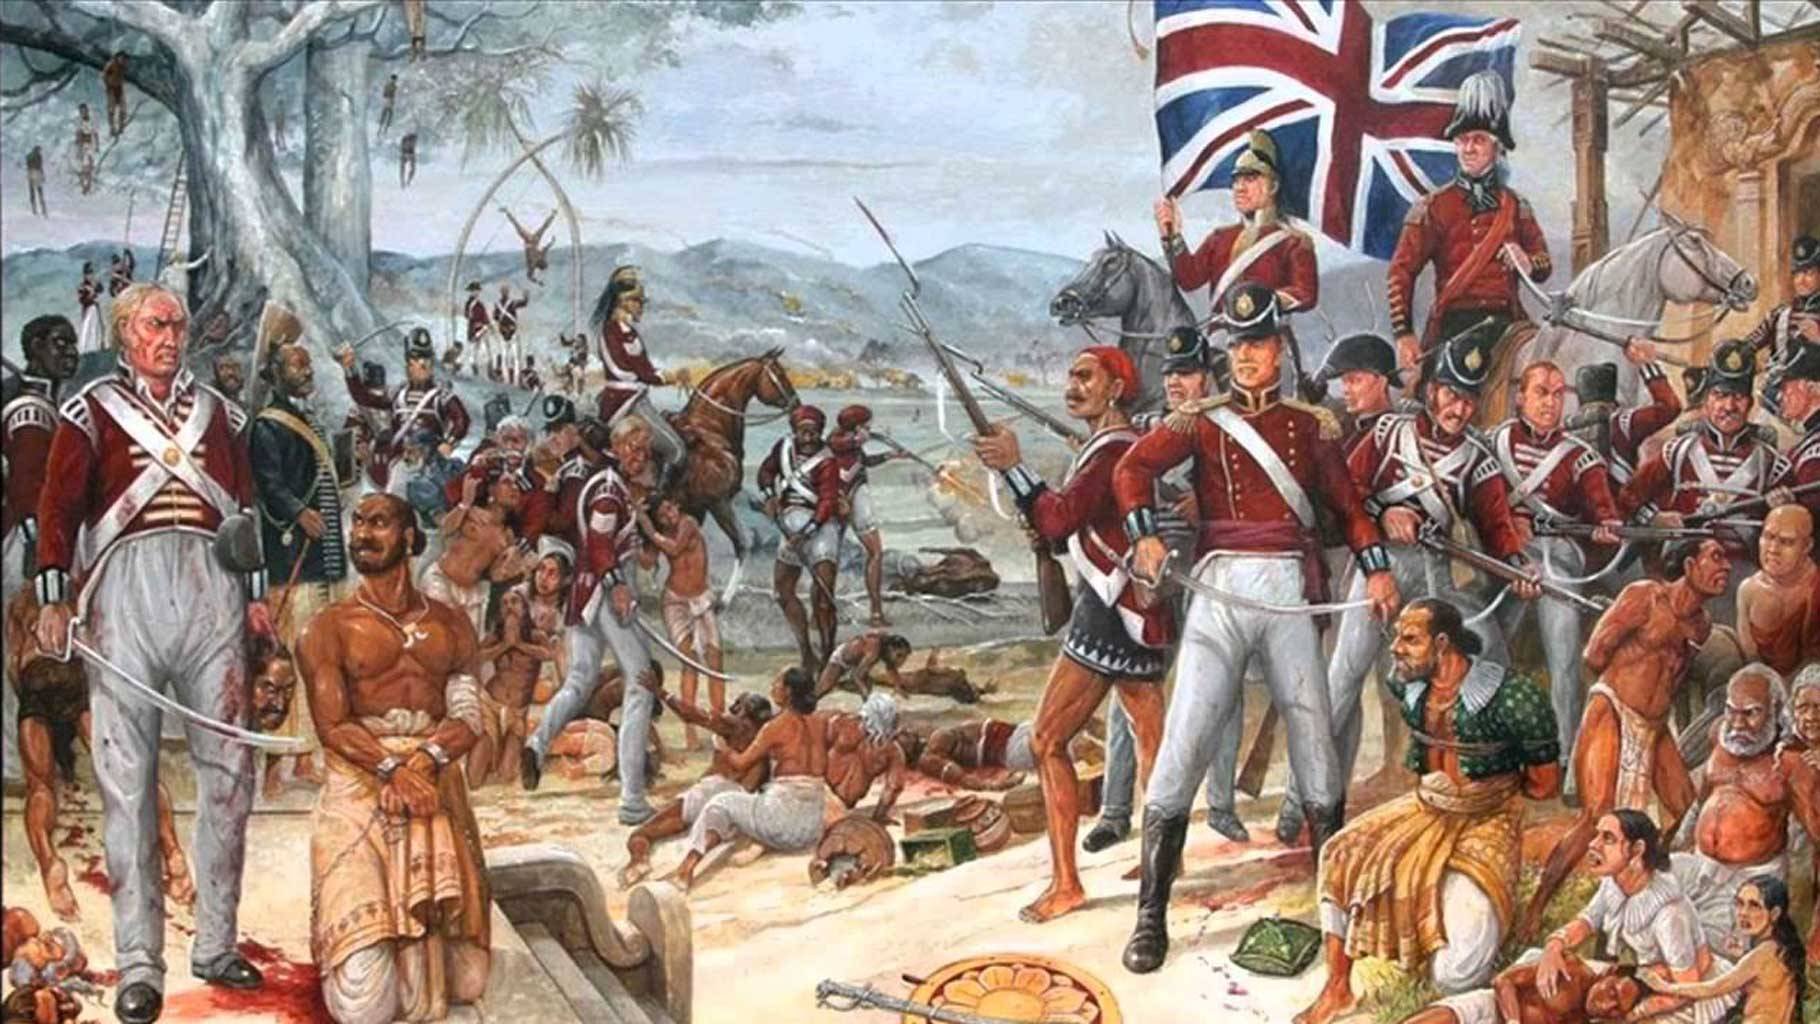 Englishmen-boasted-"spared-no-one"-executed-6000-Indians-post-1857-re